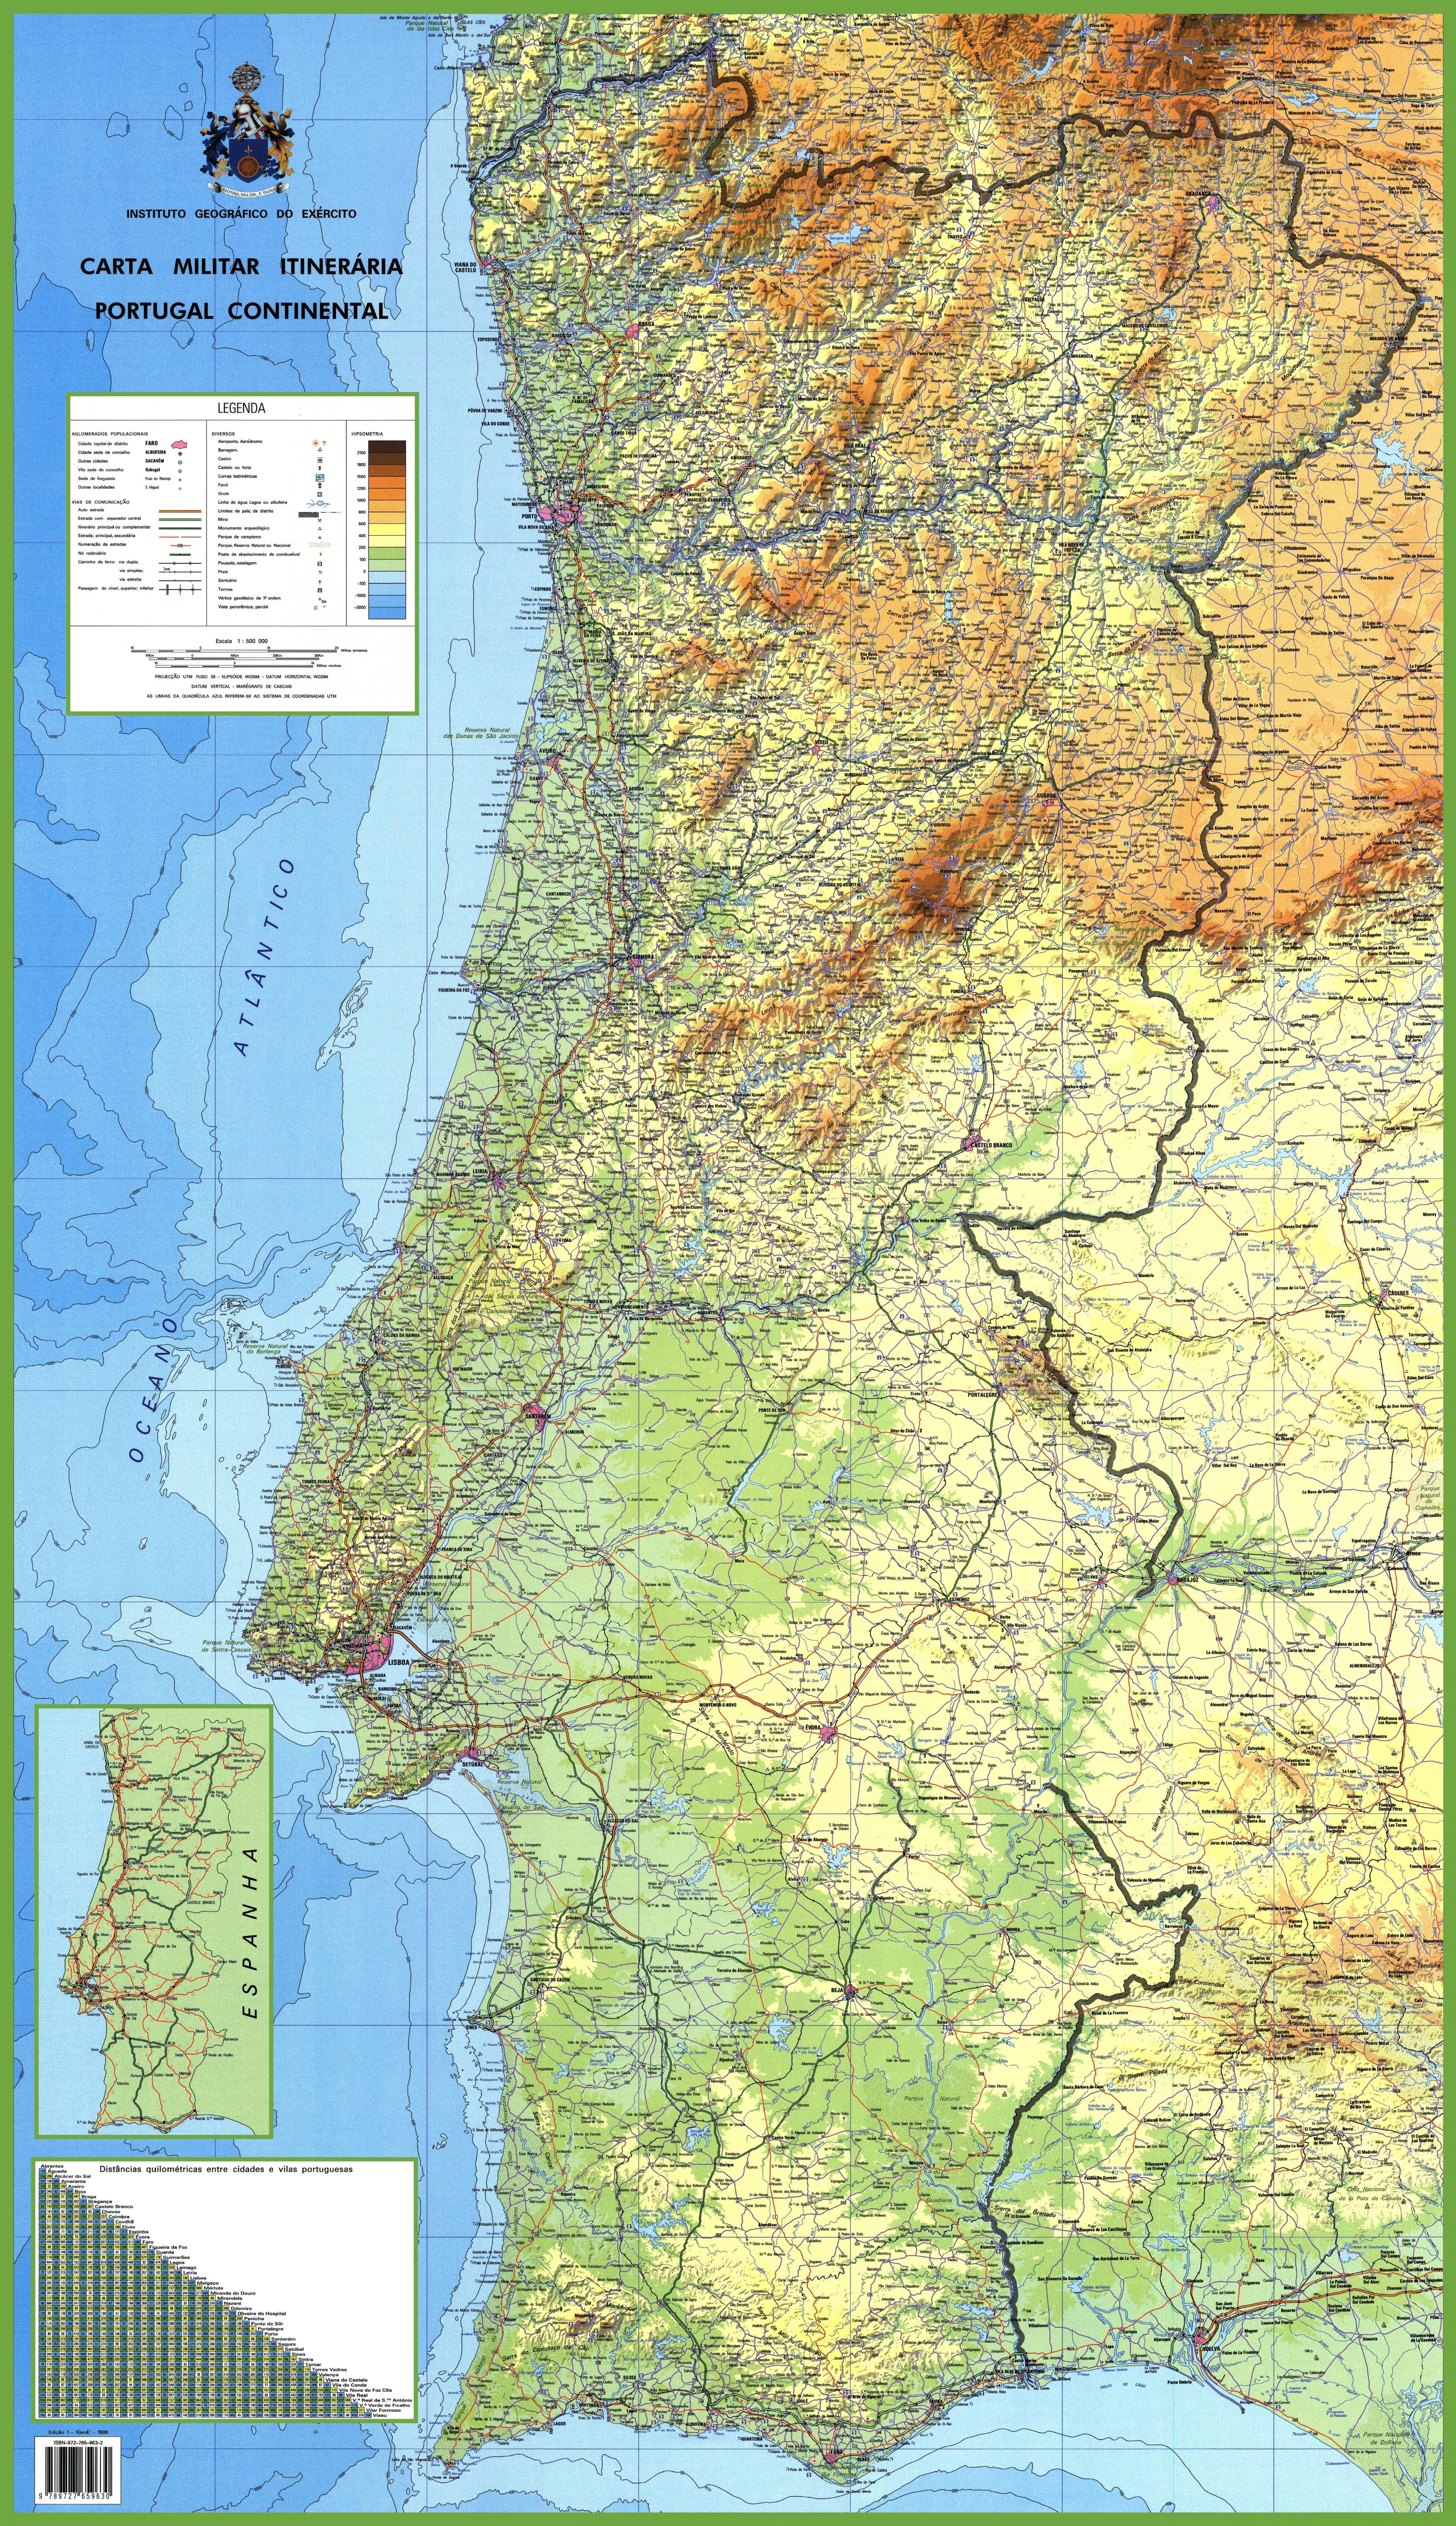 The detailed map of the Portugal with regions or states and cities